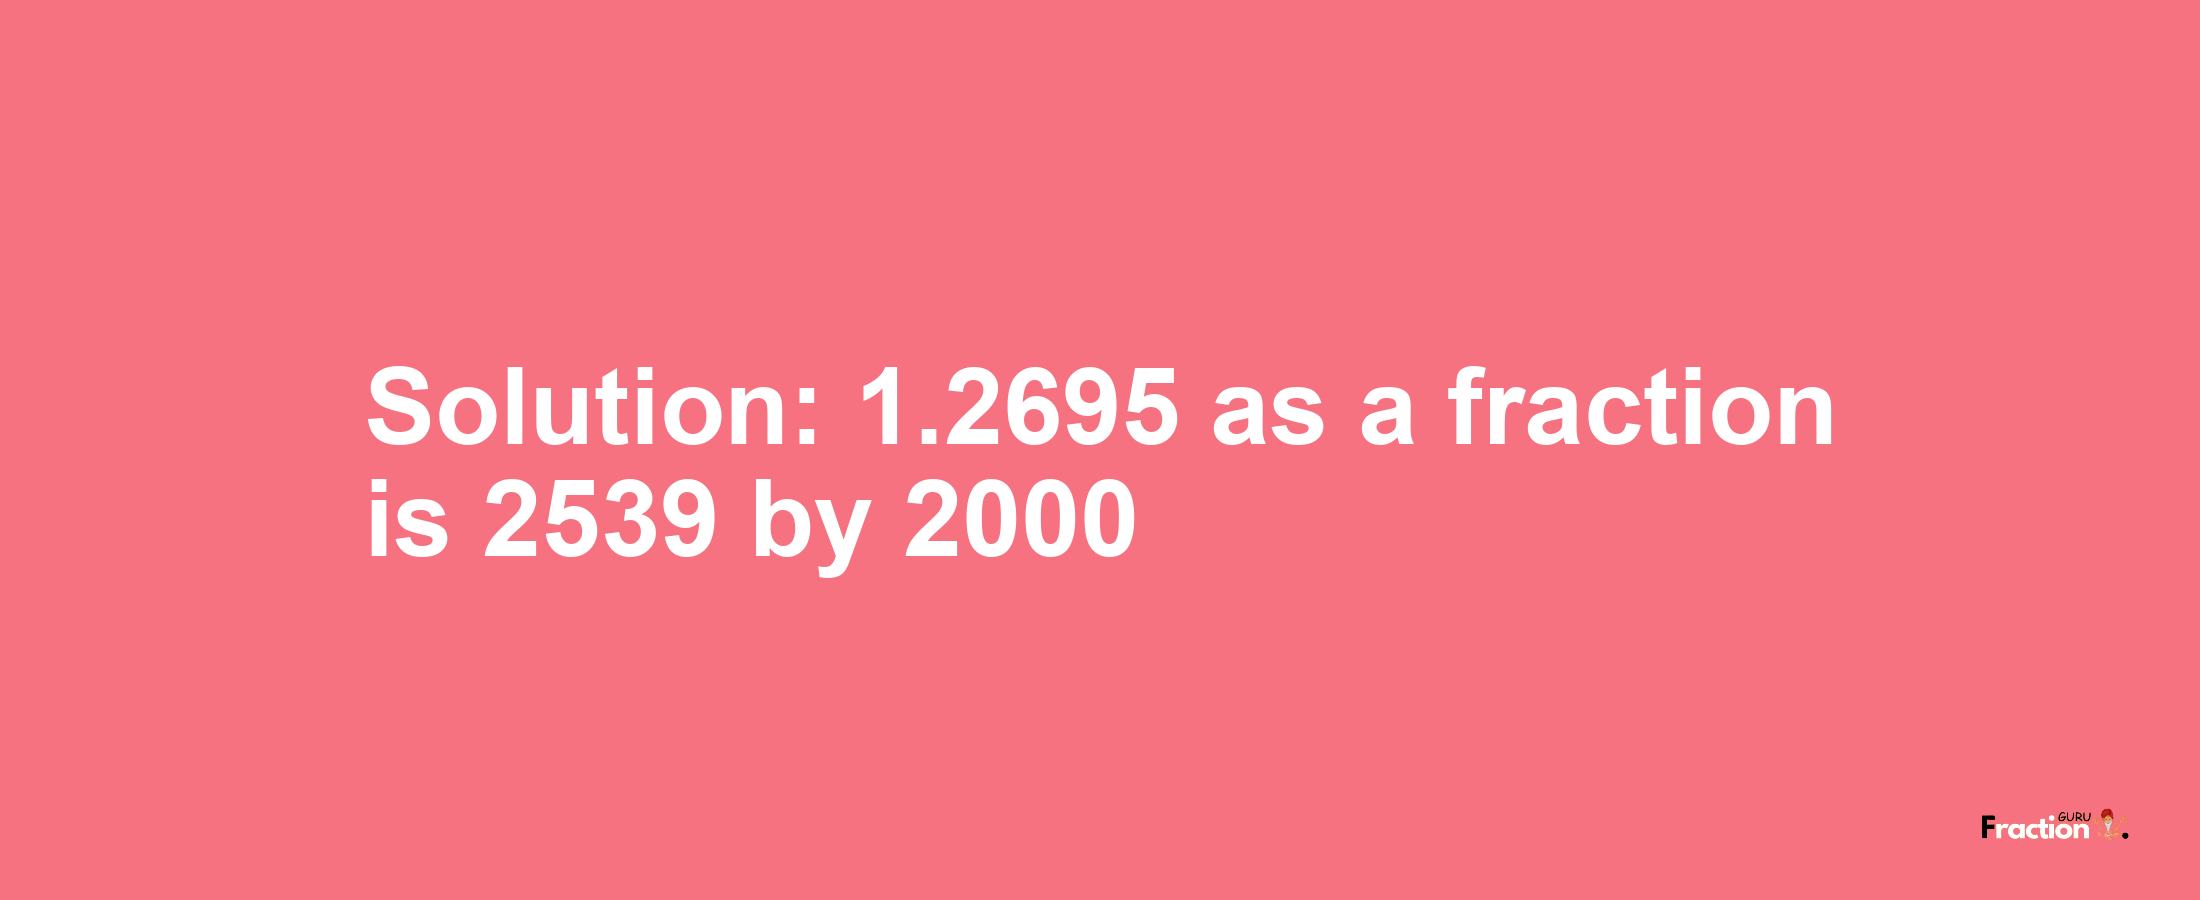 Solution:1.2695 as a fraction is 2539/2000